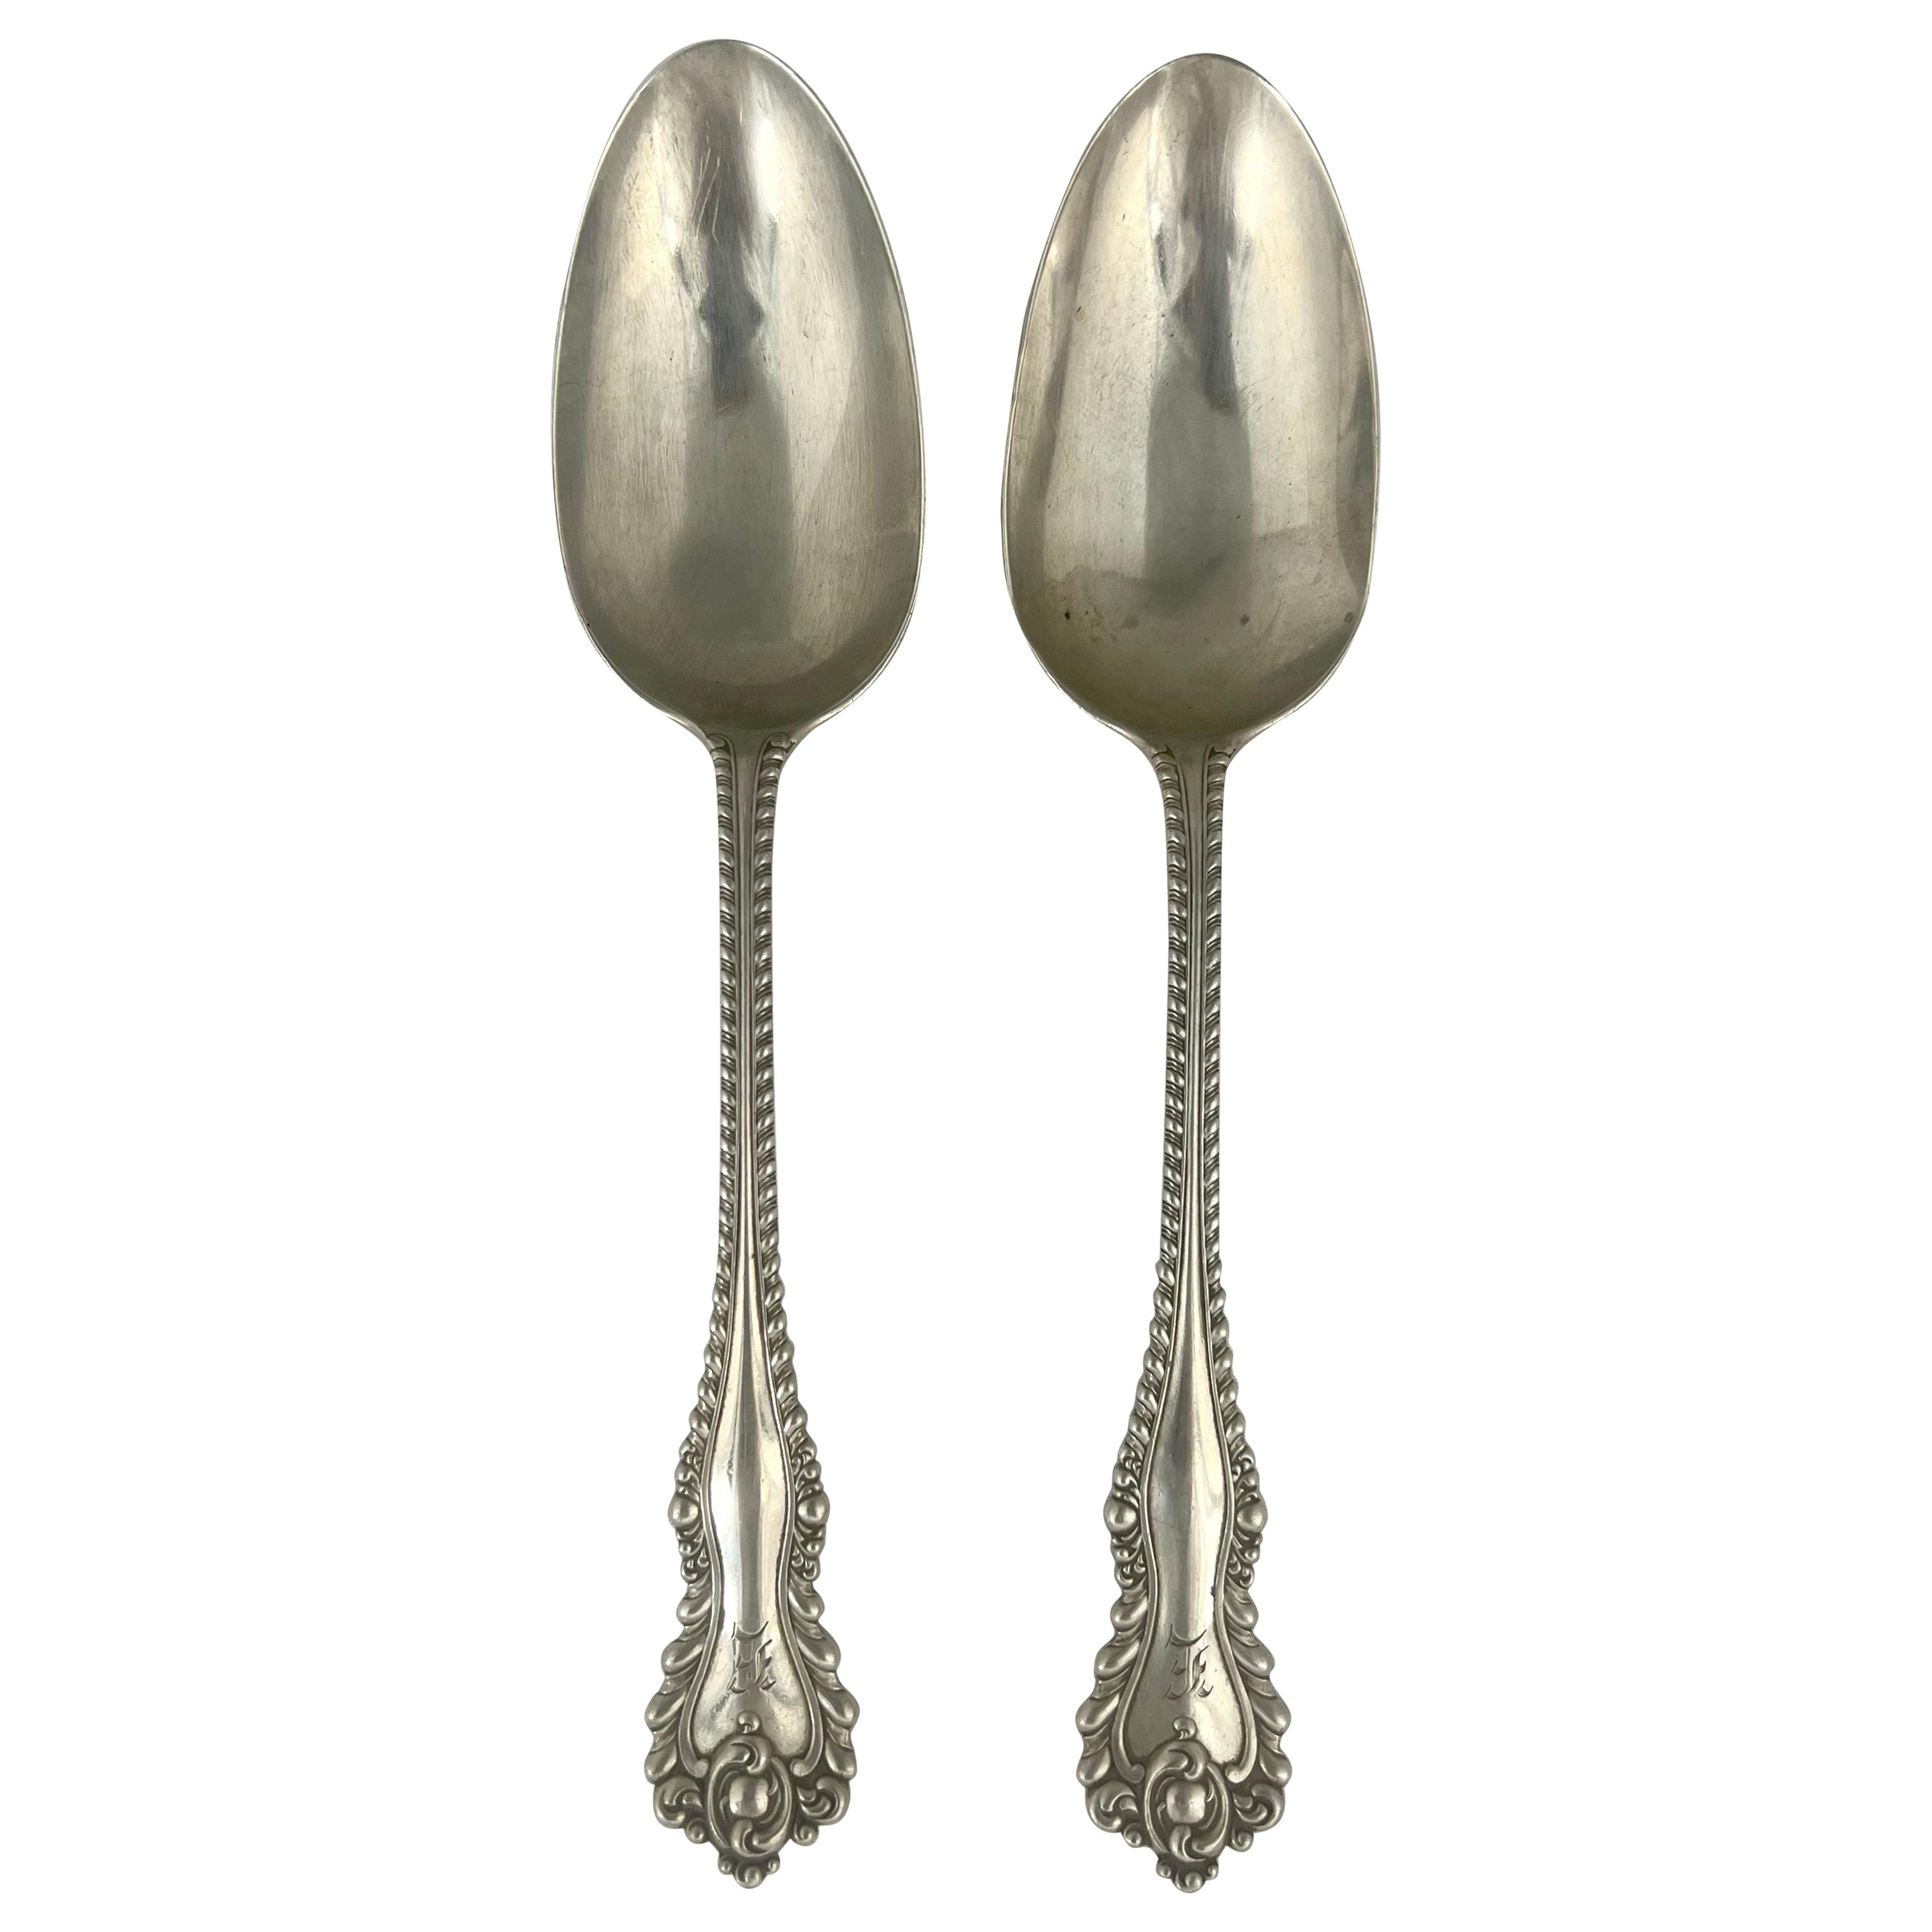 Pair of Sterling Silver Spoons Monogrammed "E" For Sale